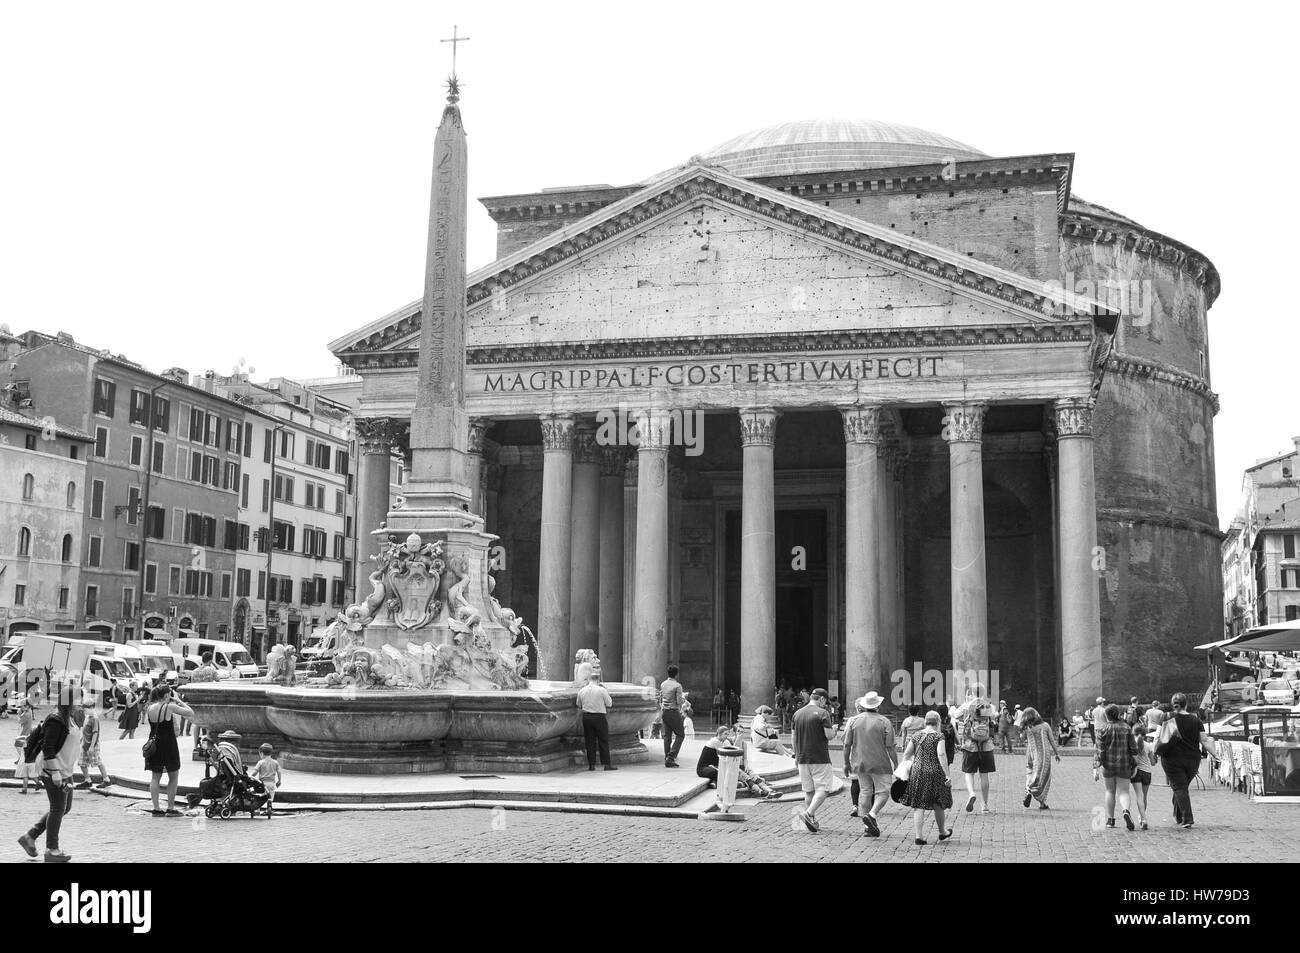 Rome, Italy - June 22, 2016: Tourists visit the Partheon, a former Roman temple, now a church, located in Piazza dela Rotonda in Rome, Italy Stock Photo